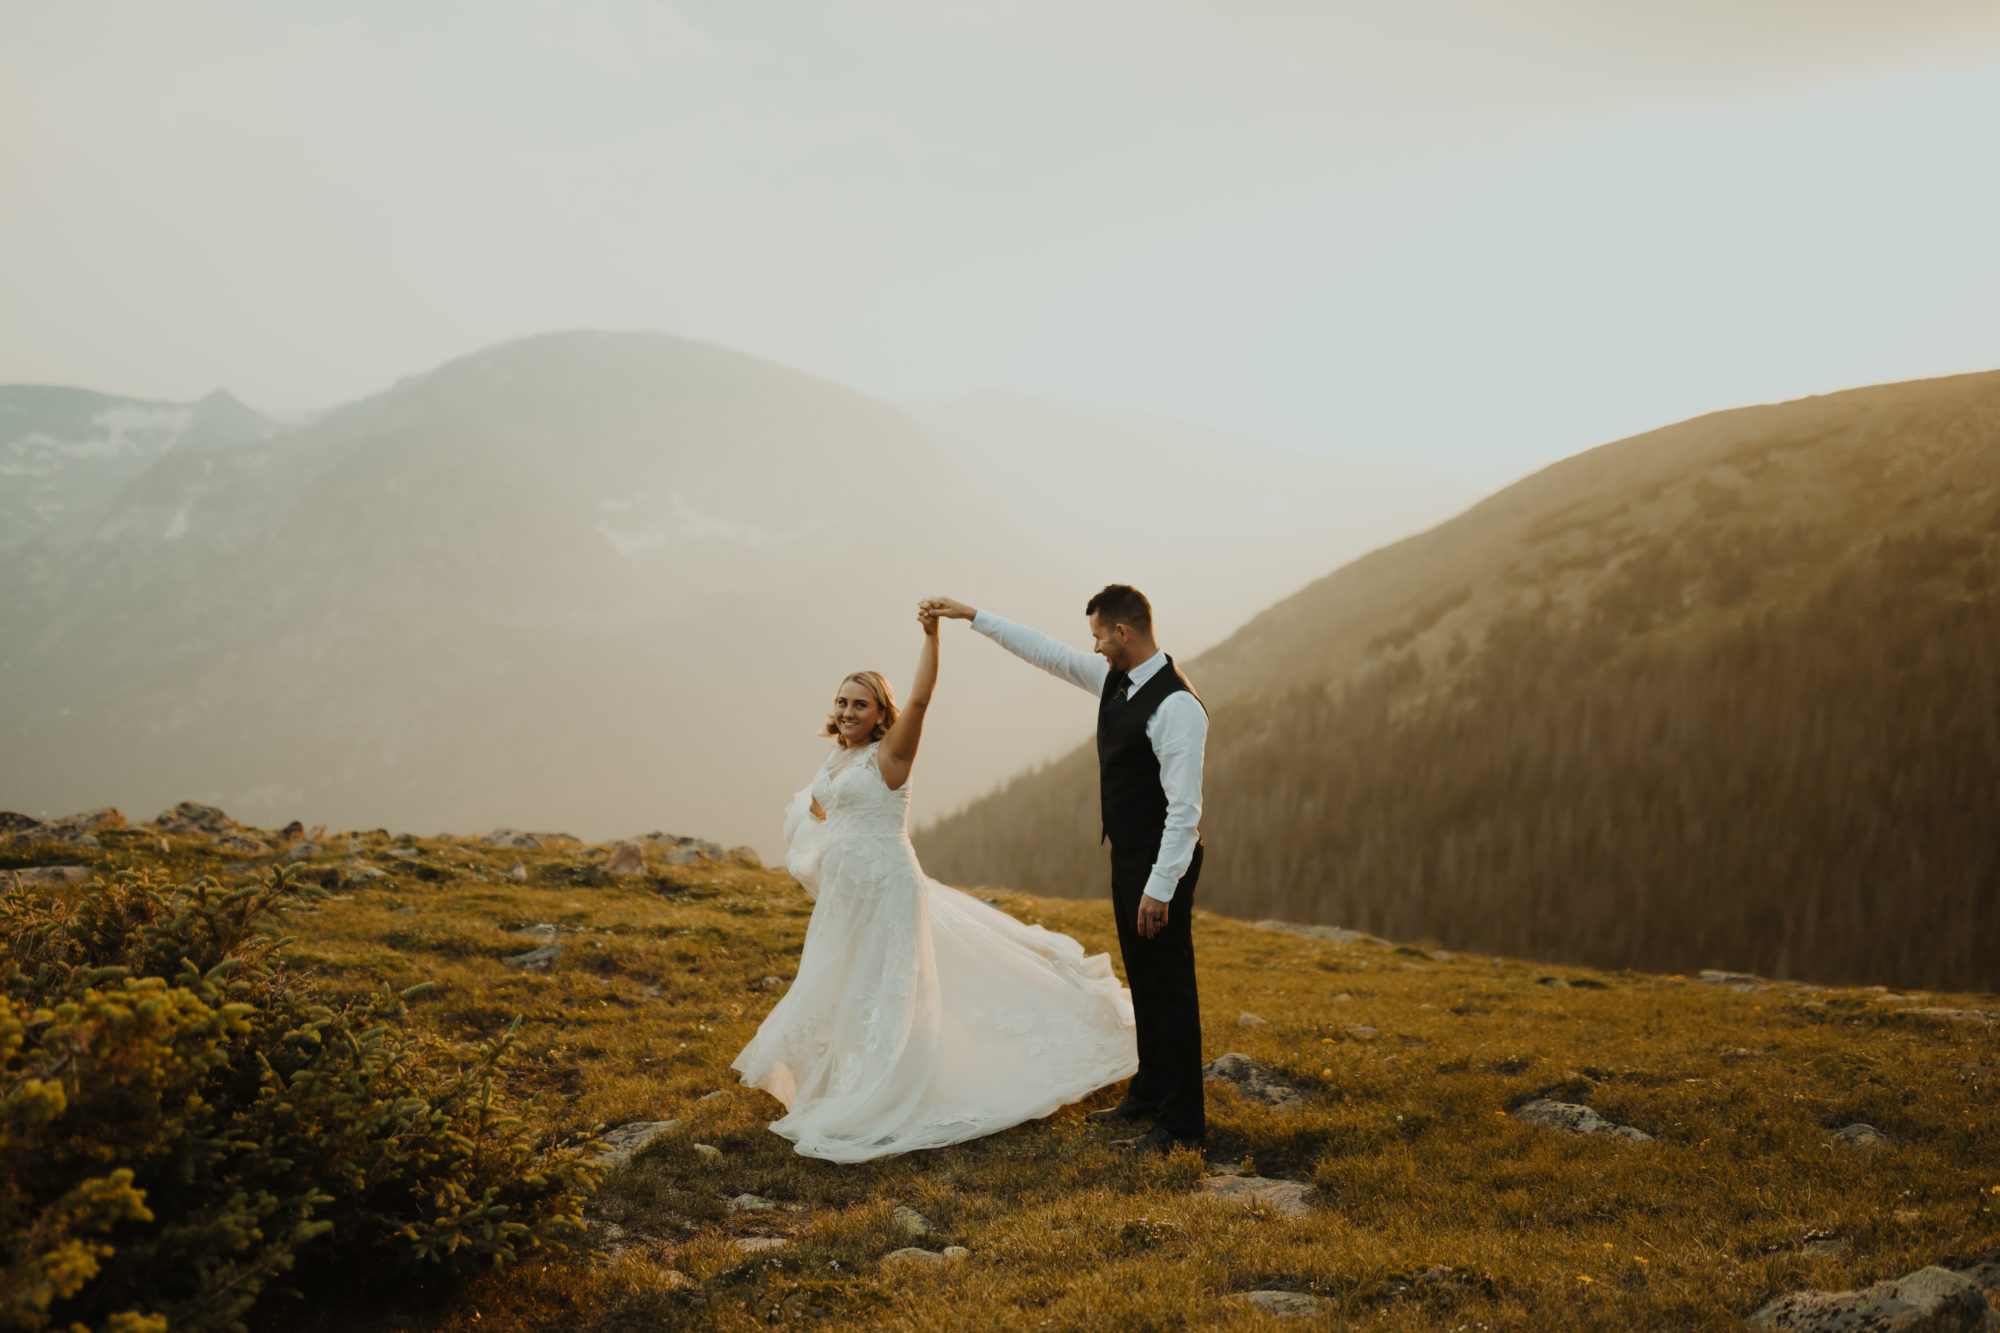 Bride and groom sharing their first dance on trail ridge road in rocky mountain national park